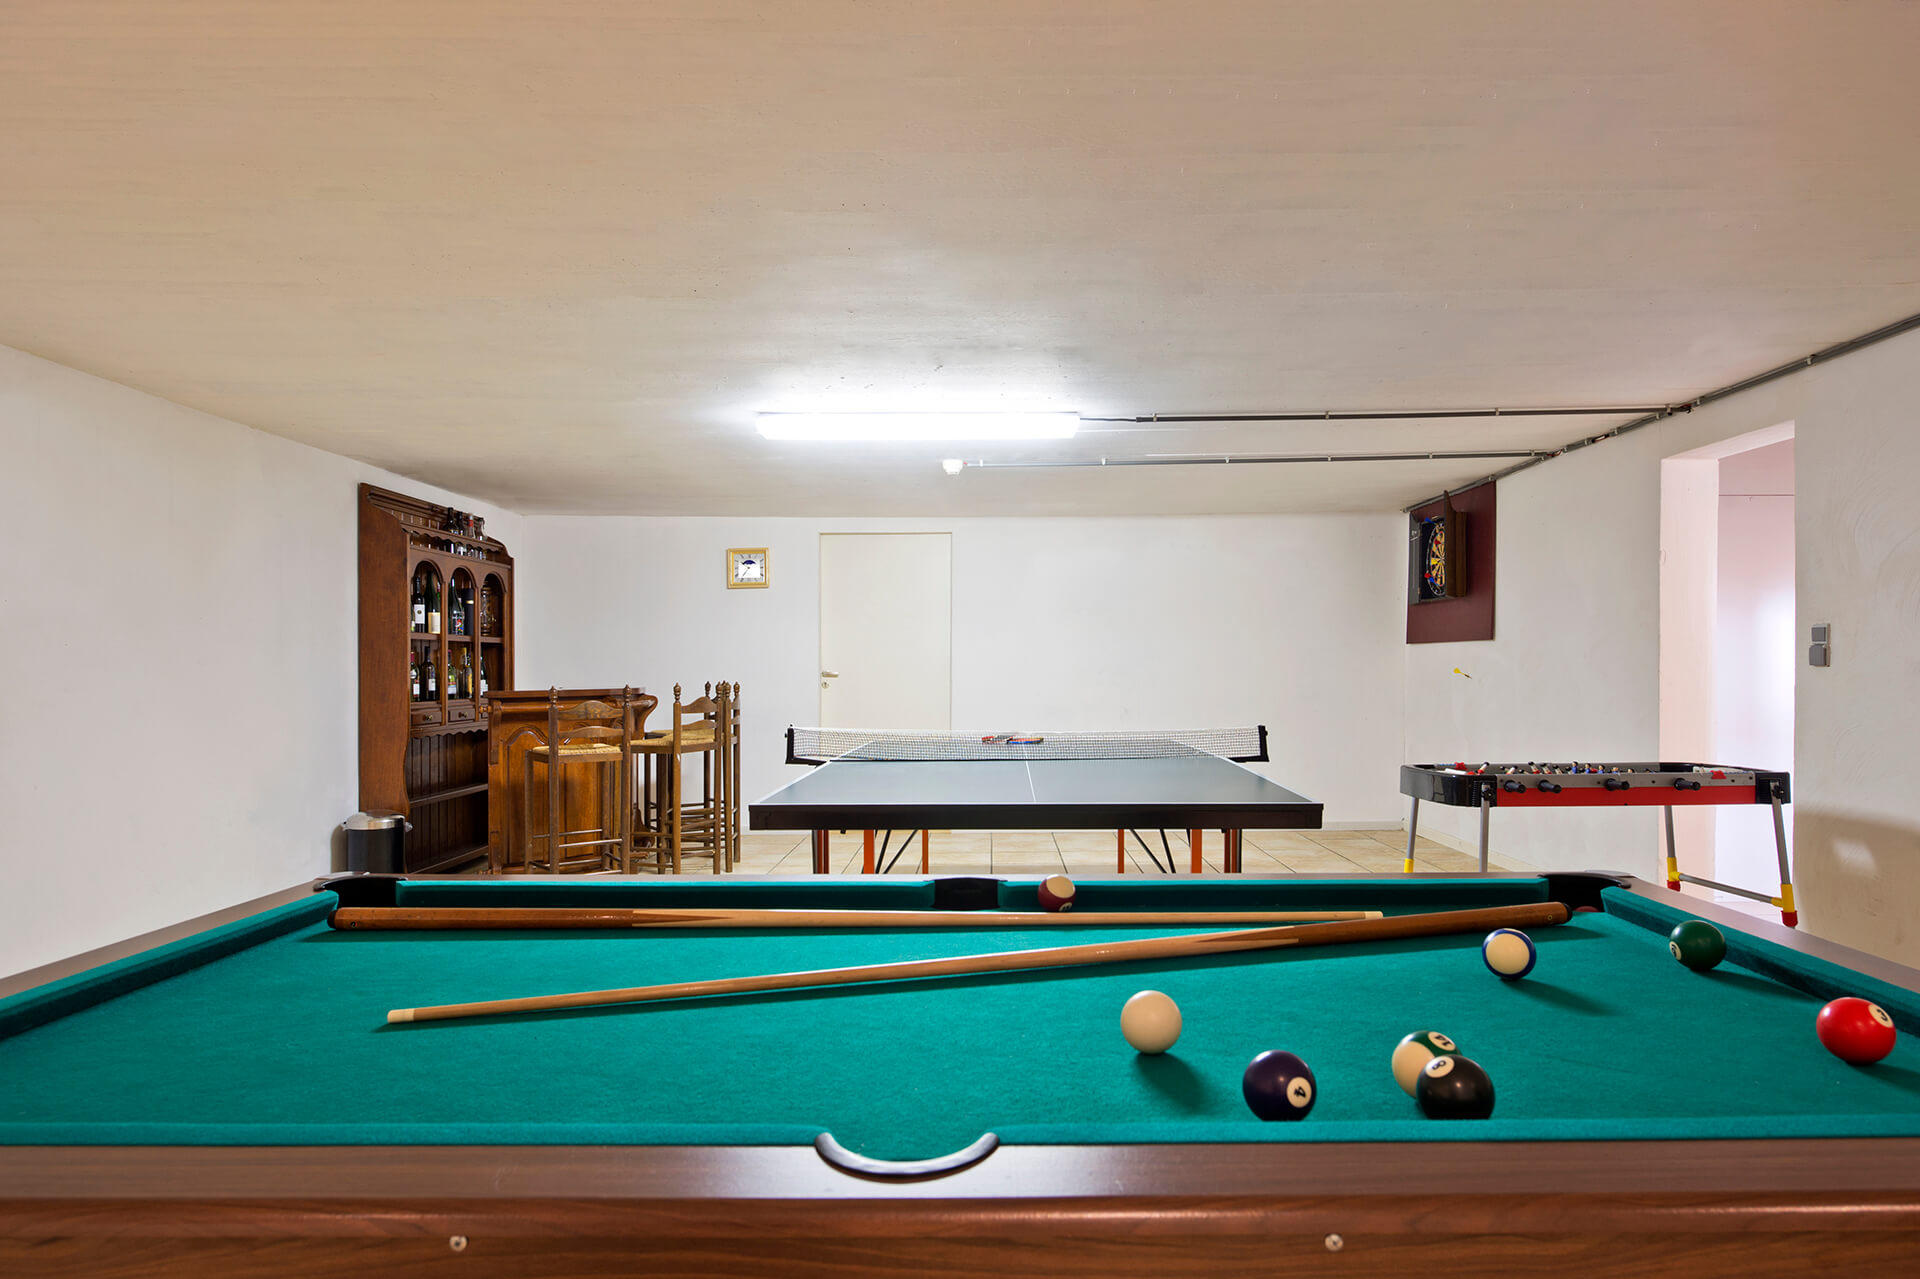 54181-pool-table-and-ping-pong-table-in-basement-2021-08-28-18-54-29-utc